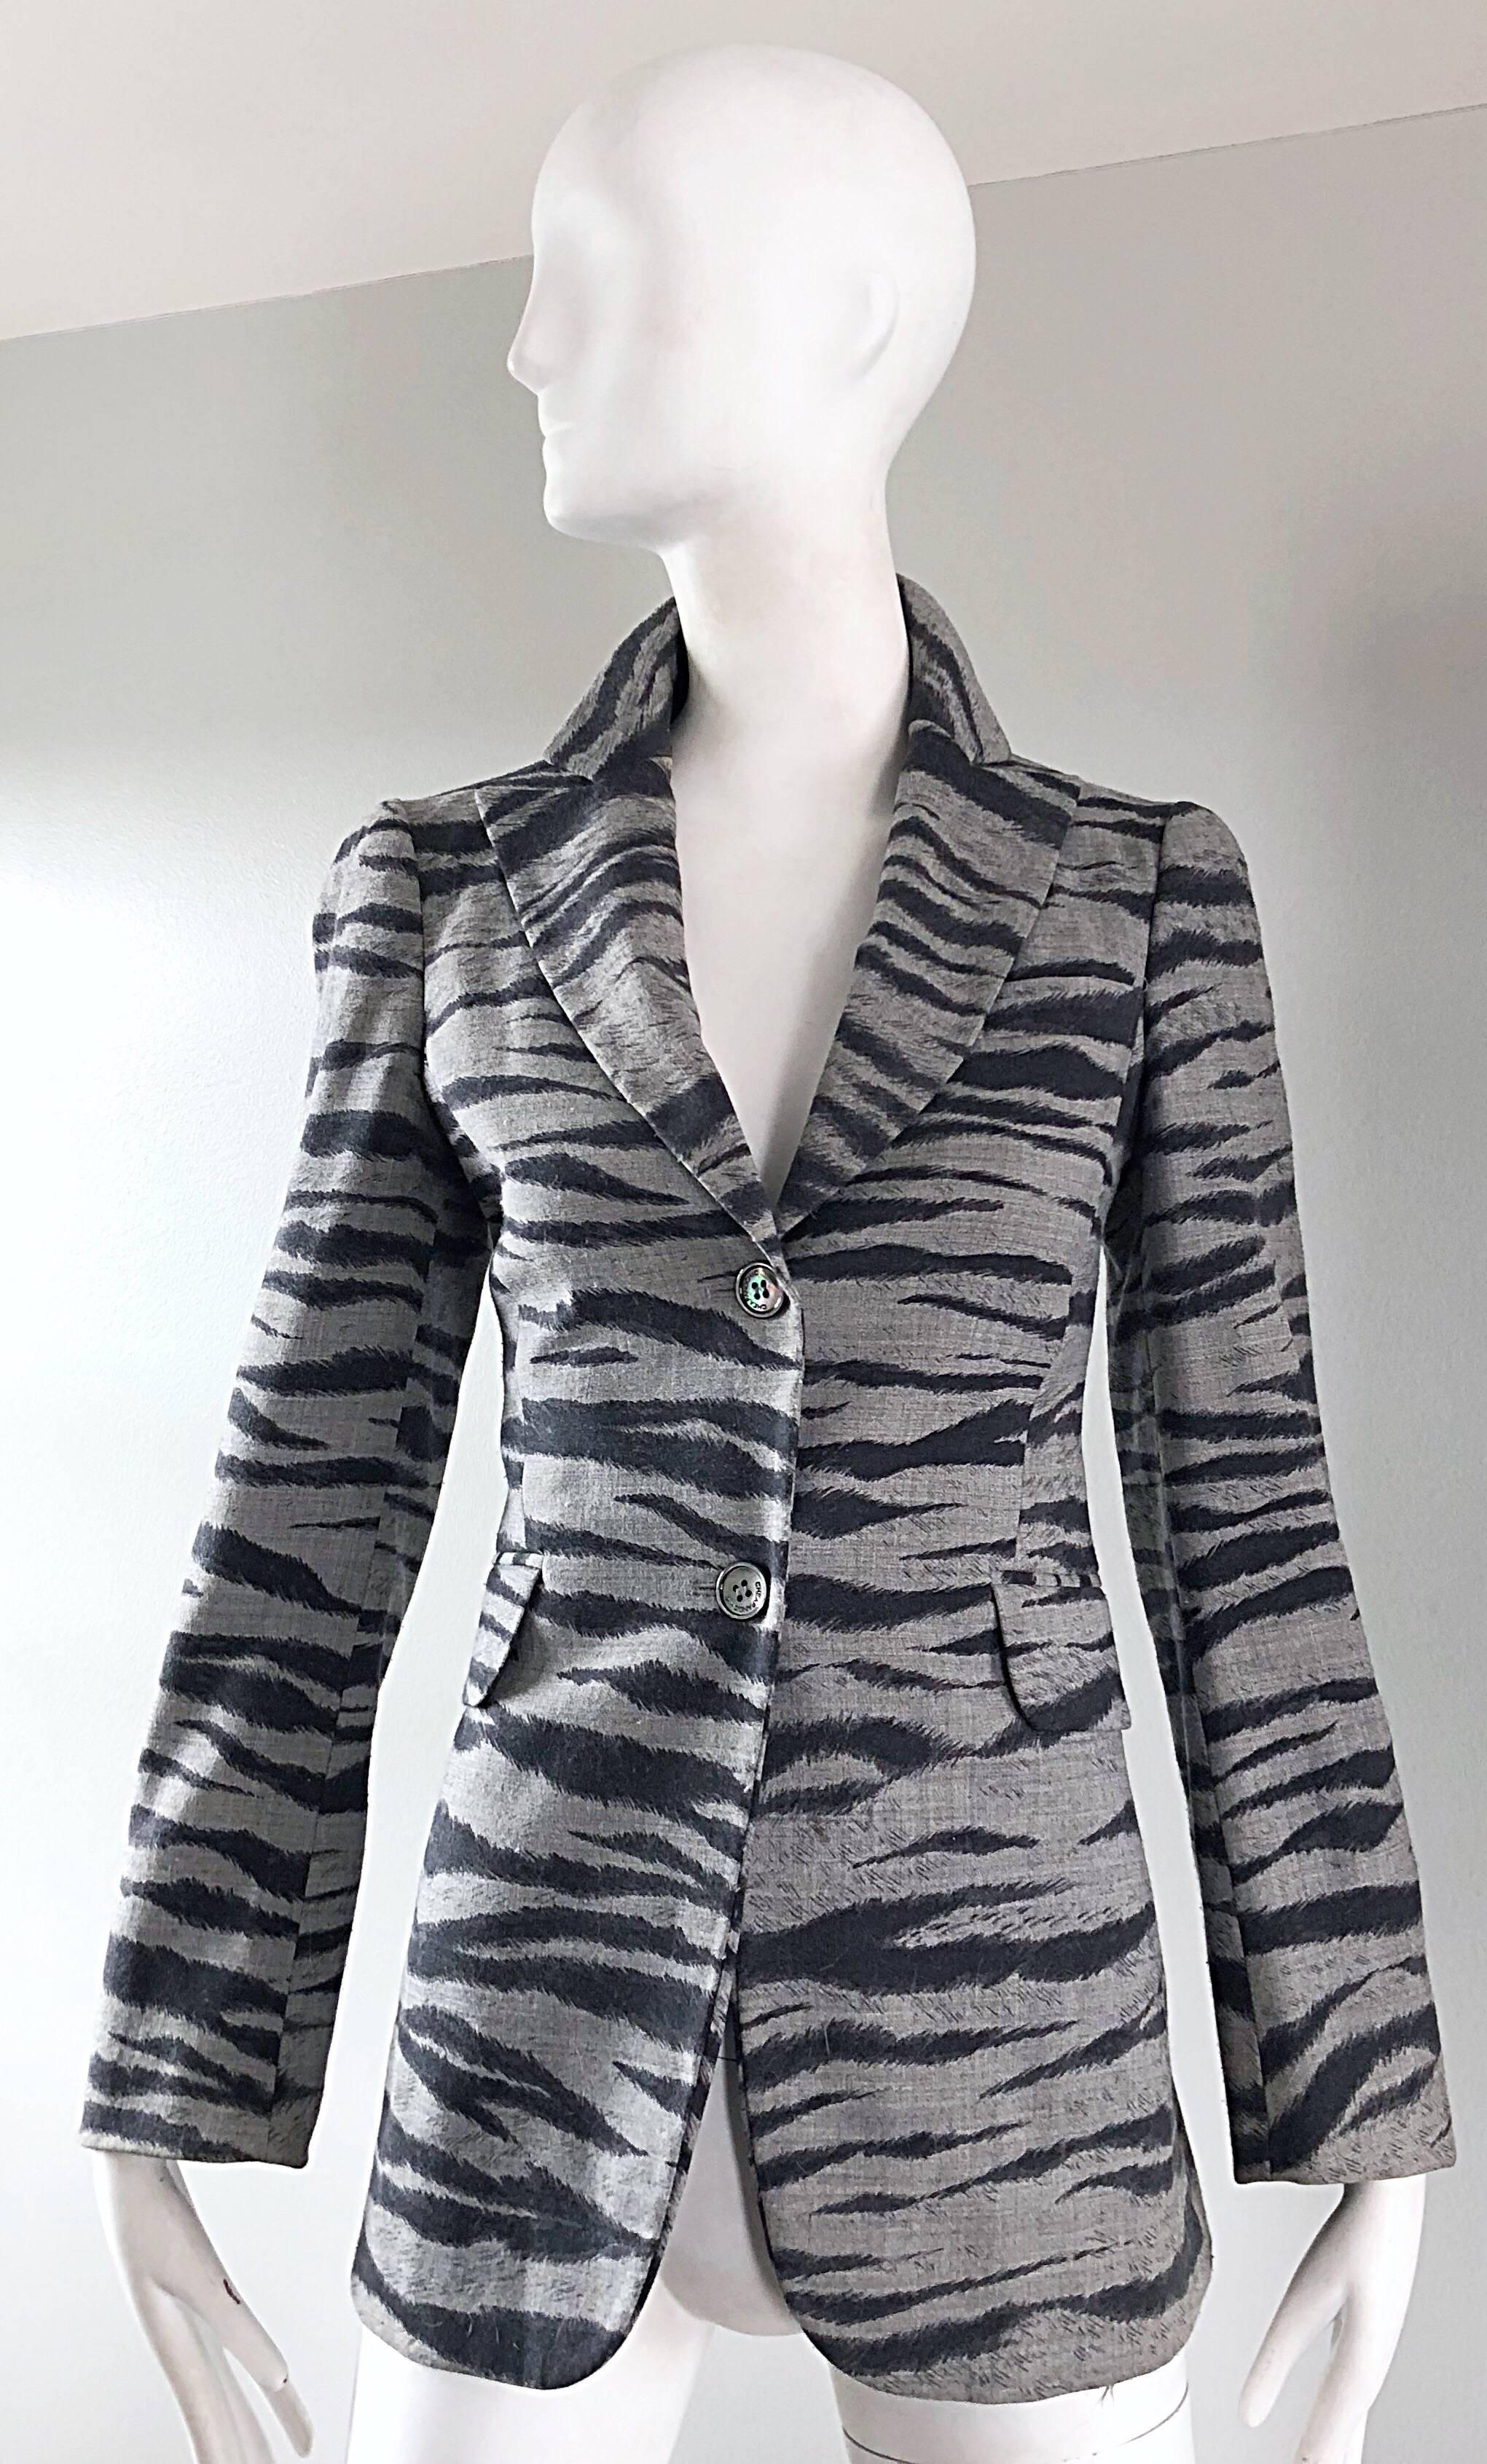 Stylish vintage 90s MOSCHINO CHEAP & CHIC grey and black zebra animal print blazer jacket! Amazing tailored silhouette flatters the figure. Two buttons up the front, with pockets at each side of the waist. Fully lined. Wear with the collar popper